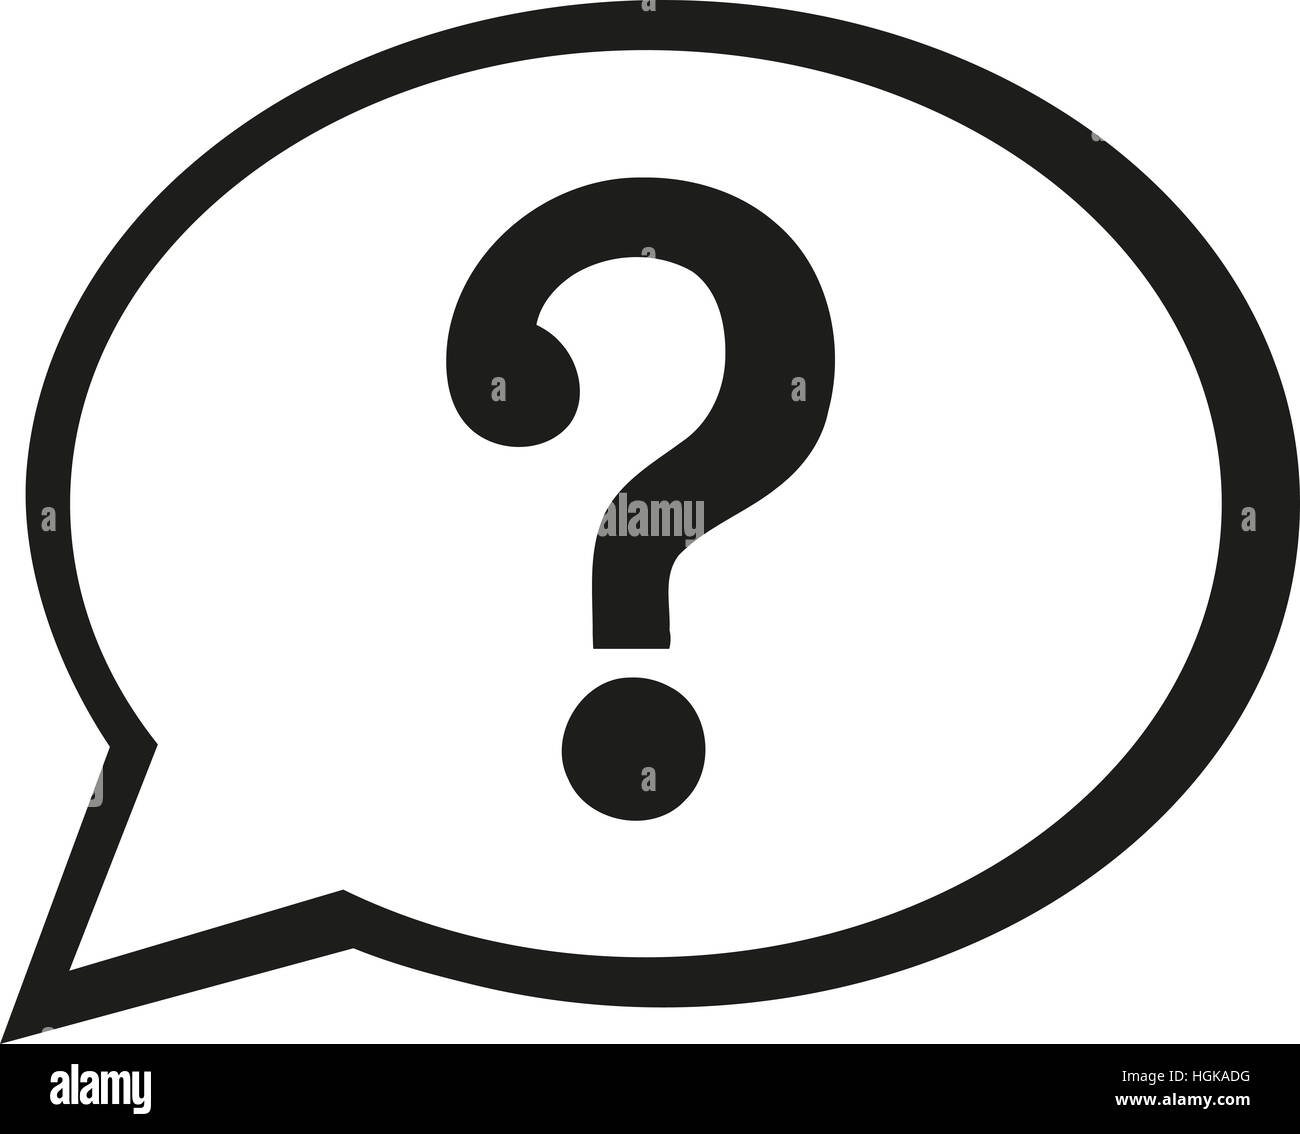 Speech bubble icon with question mark Stock Photo